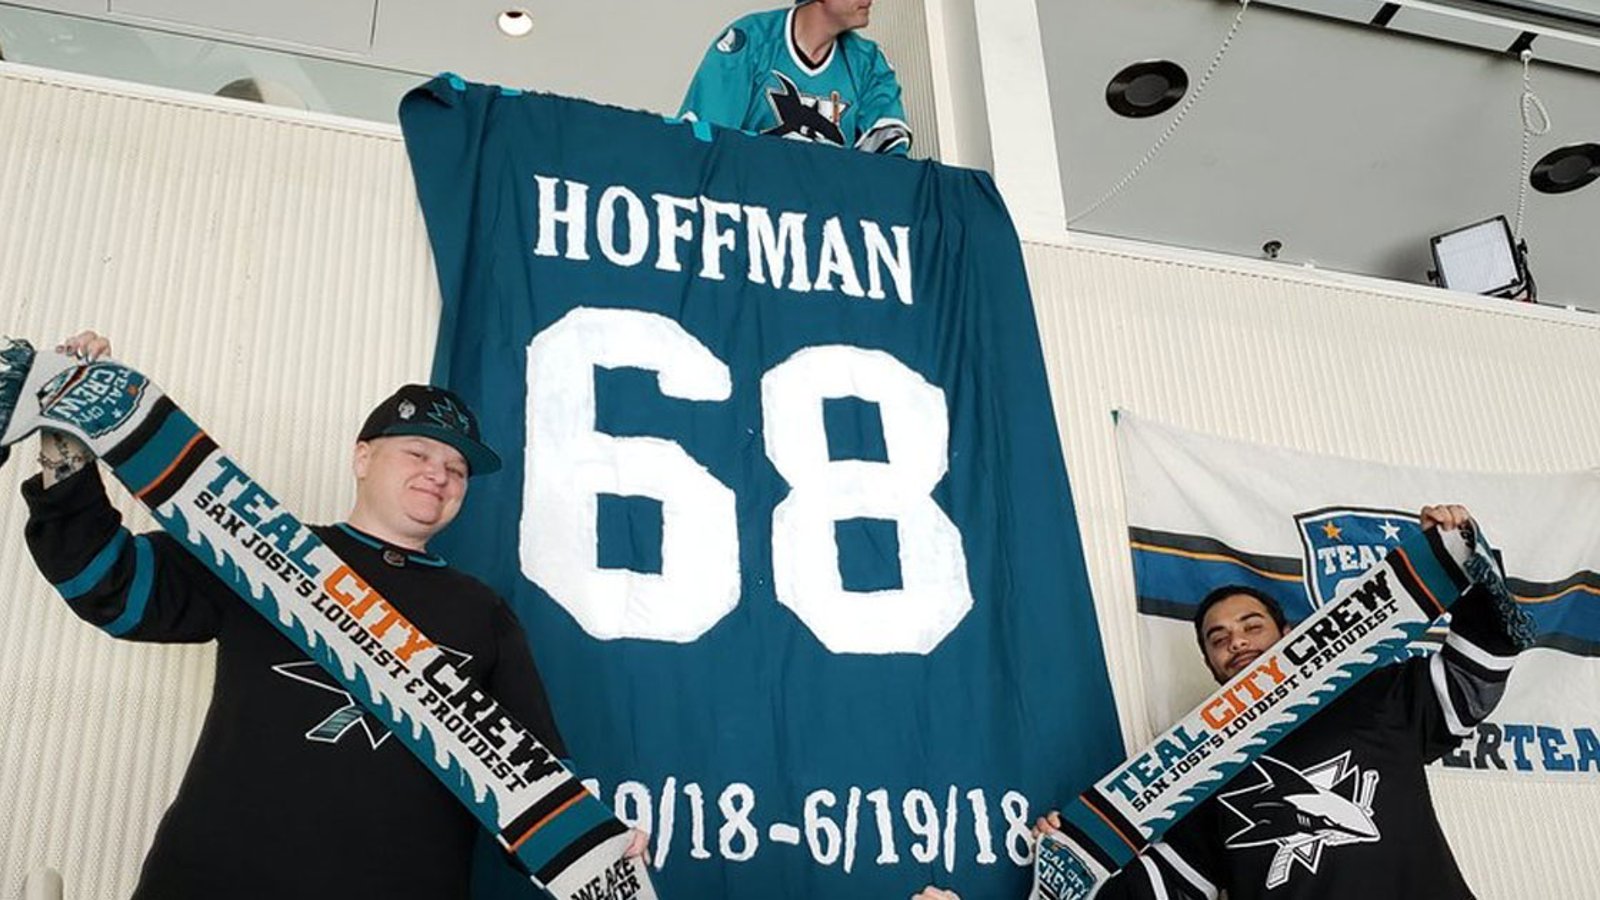 Fans display mock retired Sharks banner for Hoffman and his reaction is priceless! 